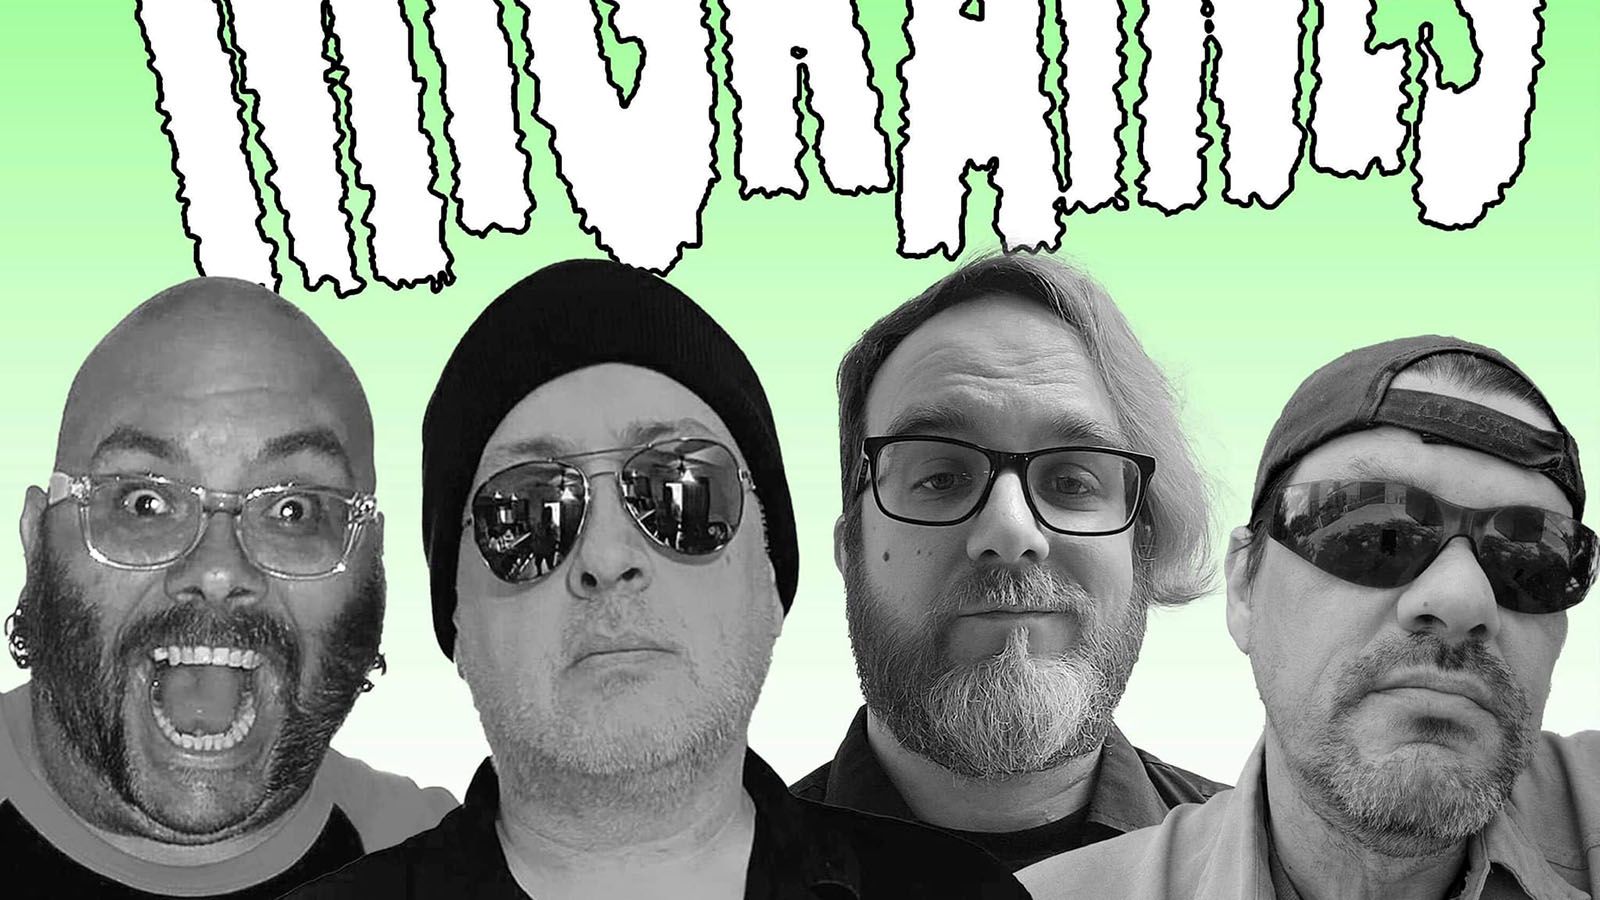 Local punk-rock outfit The Migraines will reunite for a 32nd anniversary show in Stan’s Room at Piere’s on Saturday, May 18, with Nifty Skullet, Neon Straightjackets, and Second to Last.